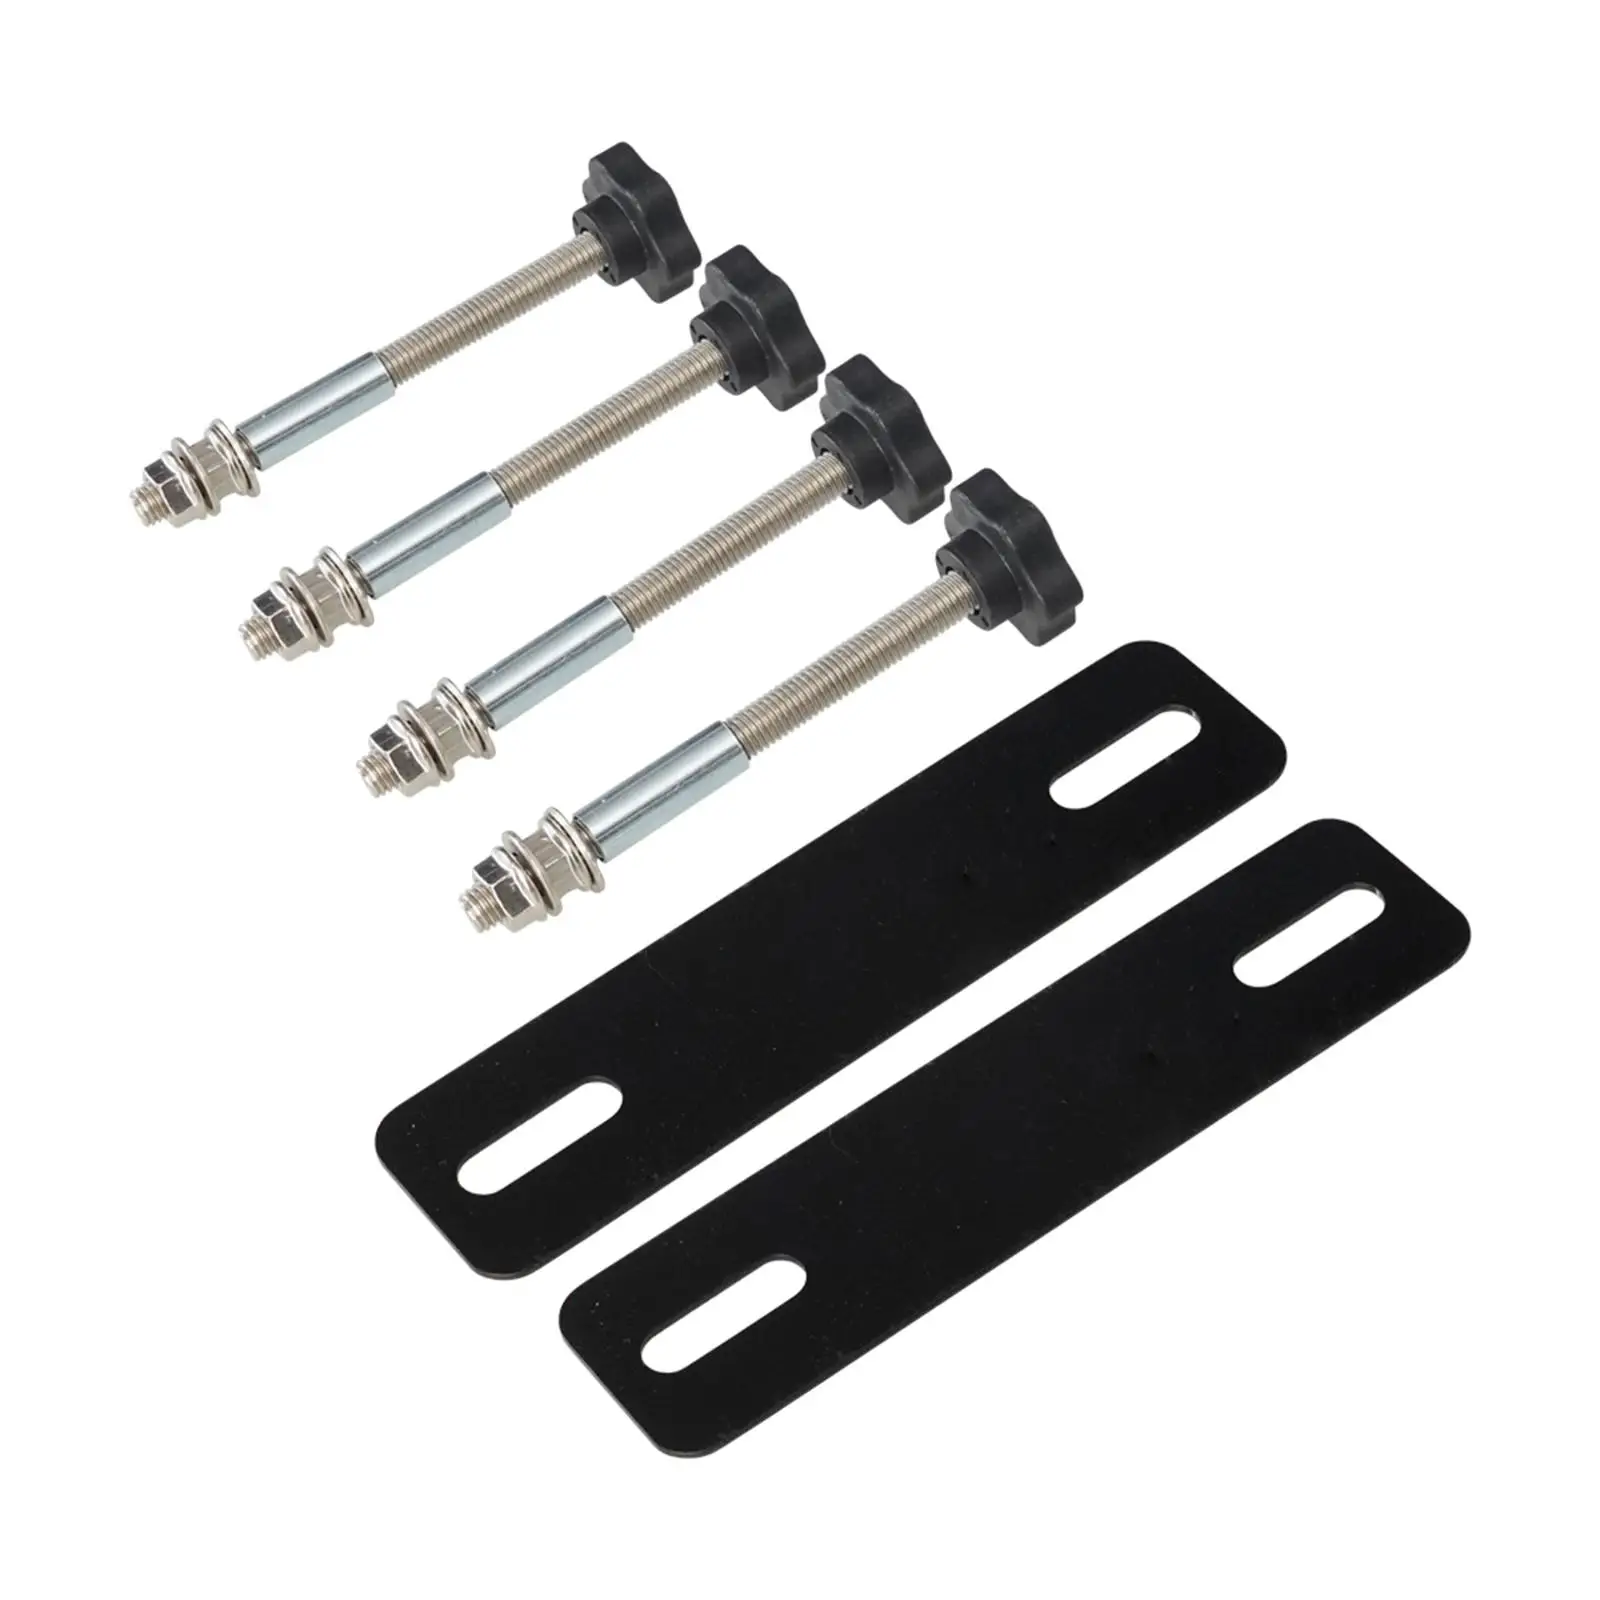 Mounting Pins Kits Easy Installation Direct Replaces for Traction Boards